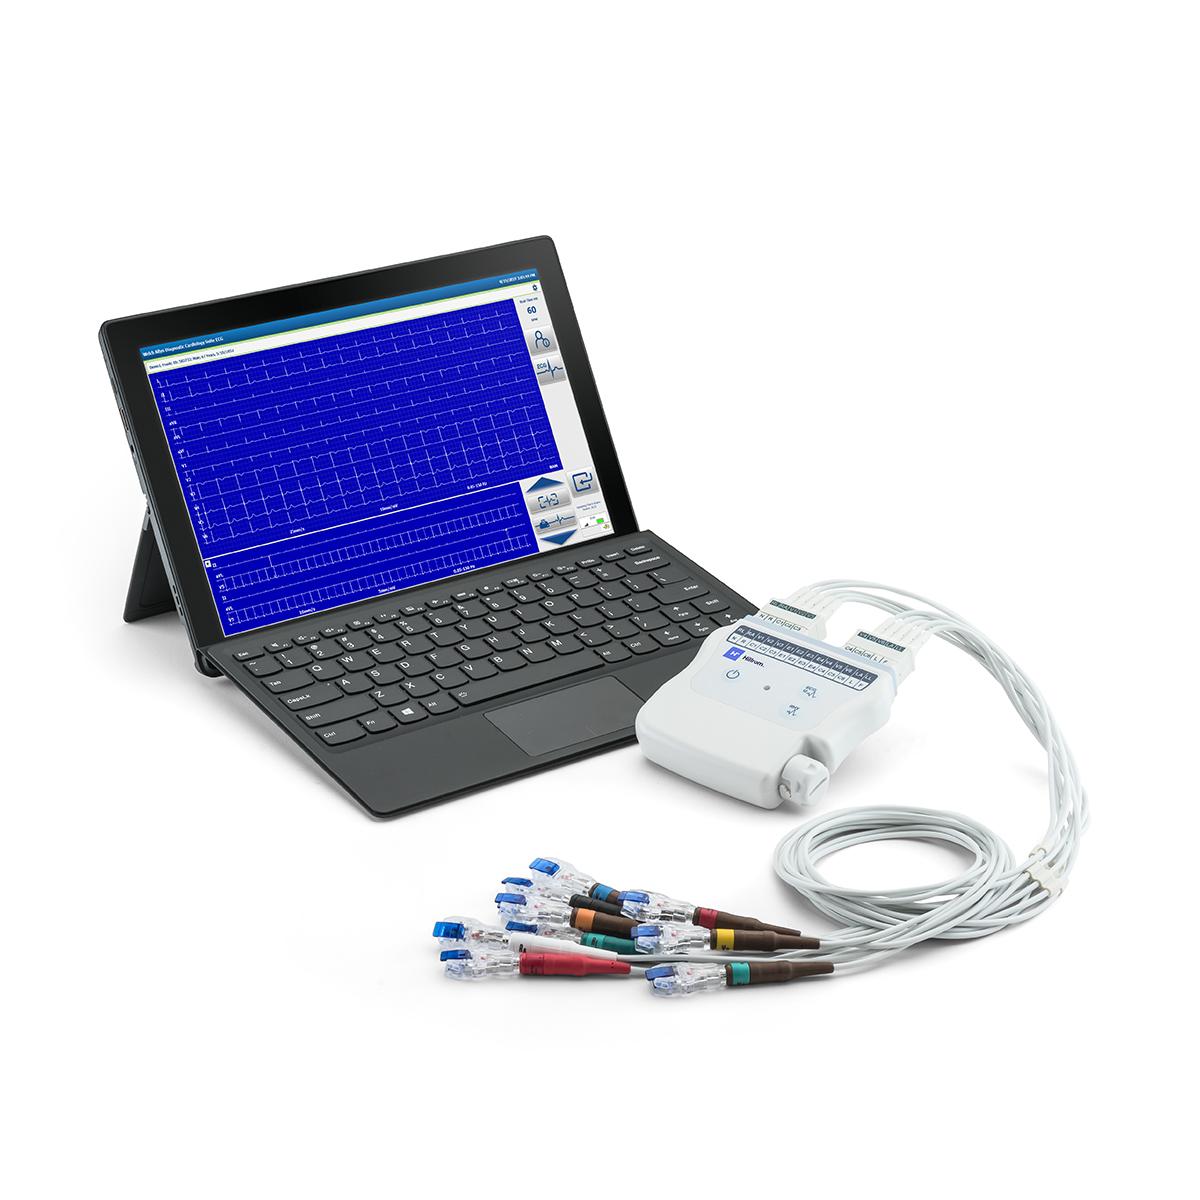 The Diagnostic Cardiology Suite and its Wireless Acquisition Module. The laptop screen displays an ECG exam in progress.